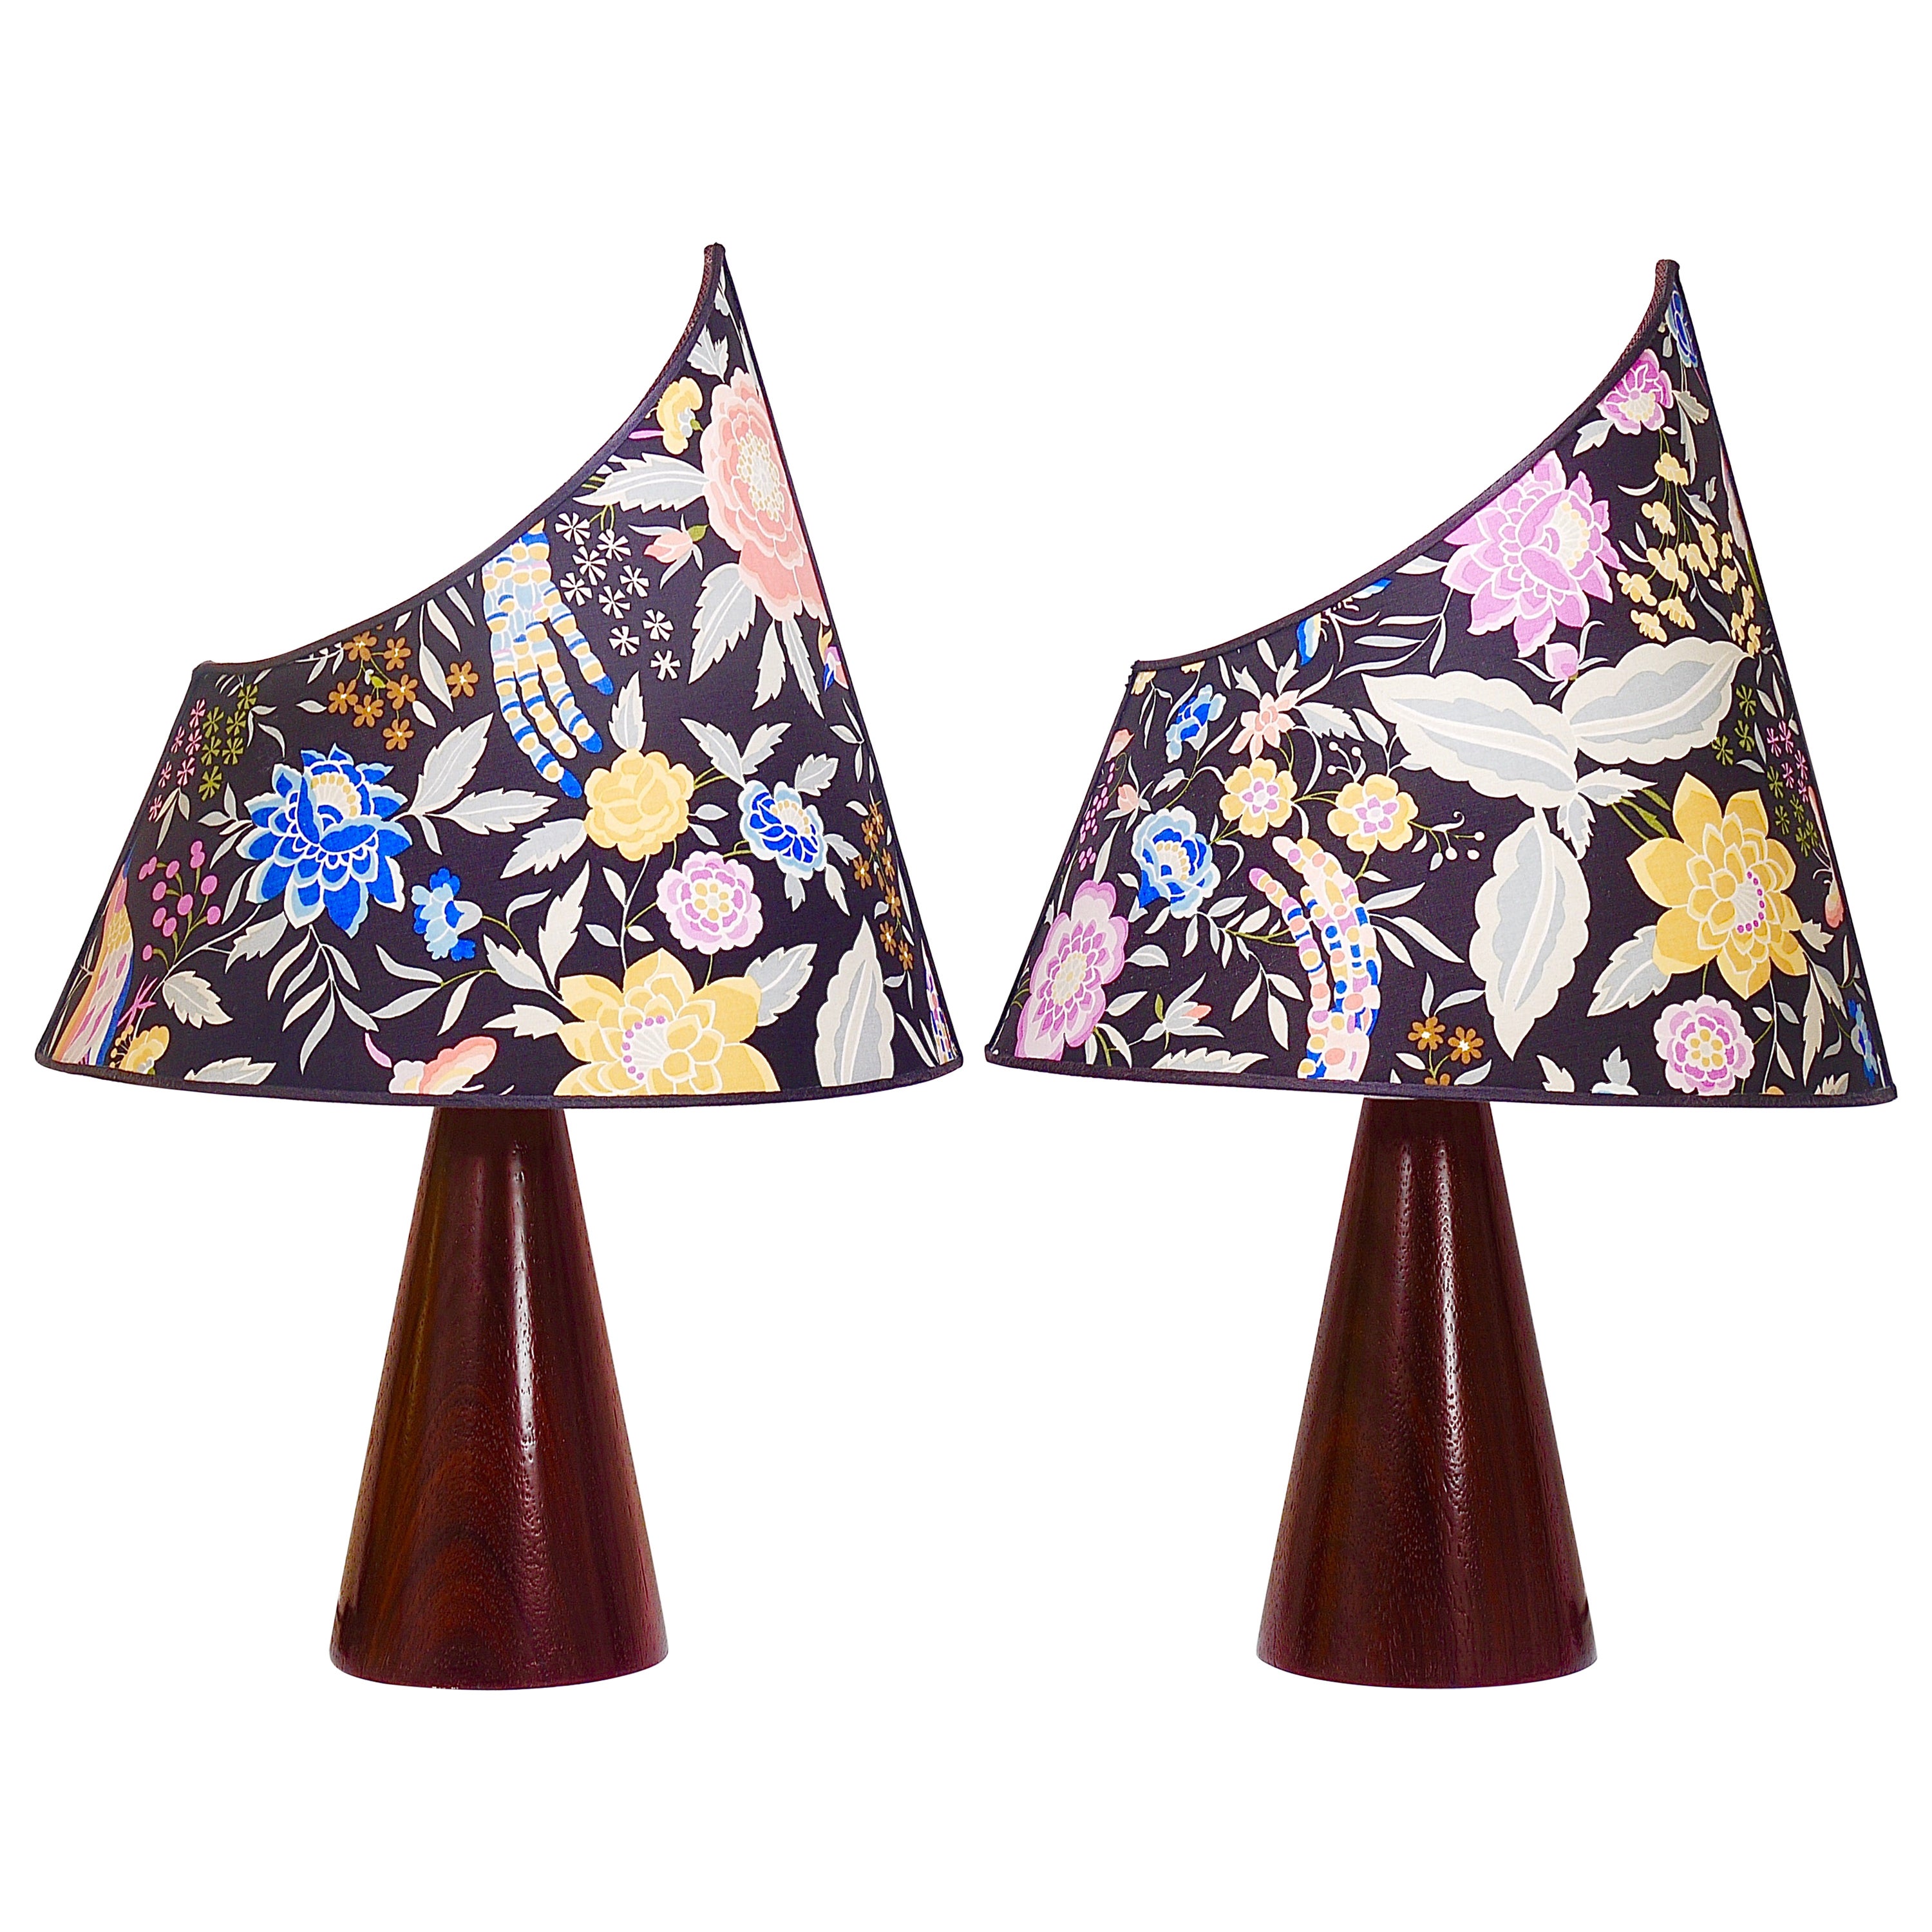 A Pair Missoni Post-Modern Table Side Lamps by Massimo Valloto, Italy, 1980s For Sale